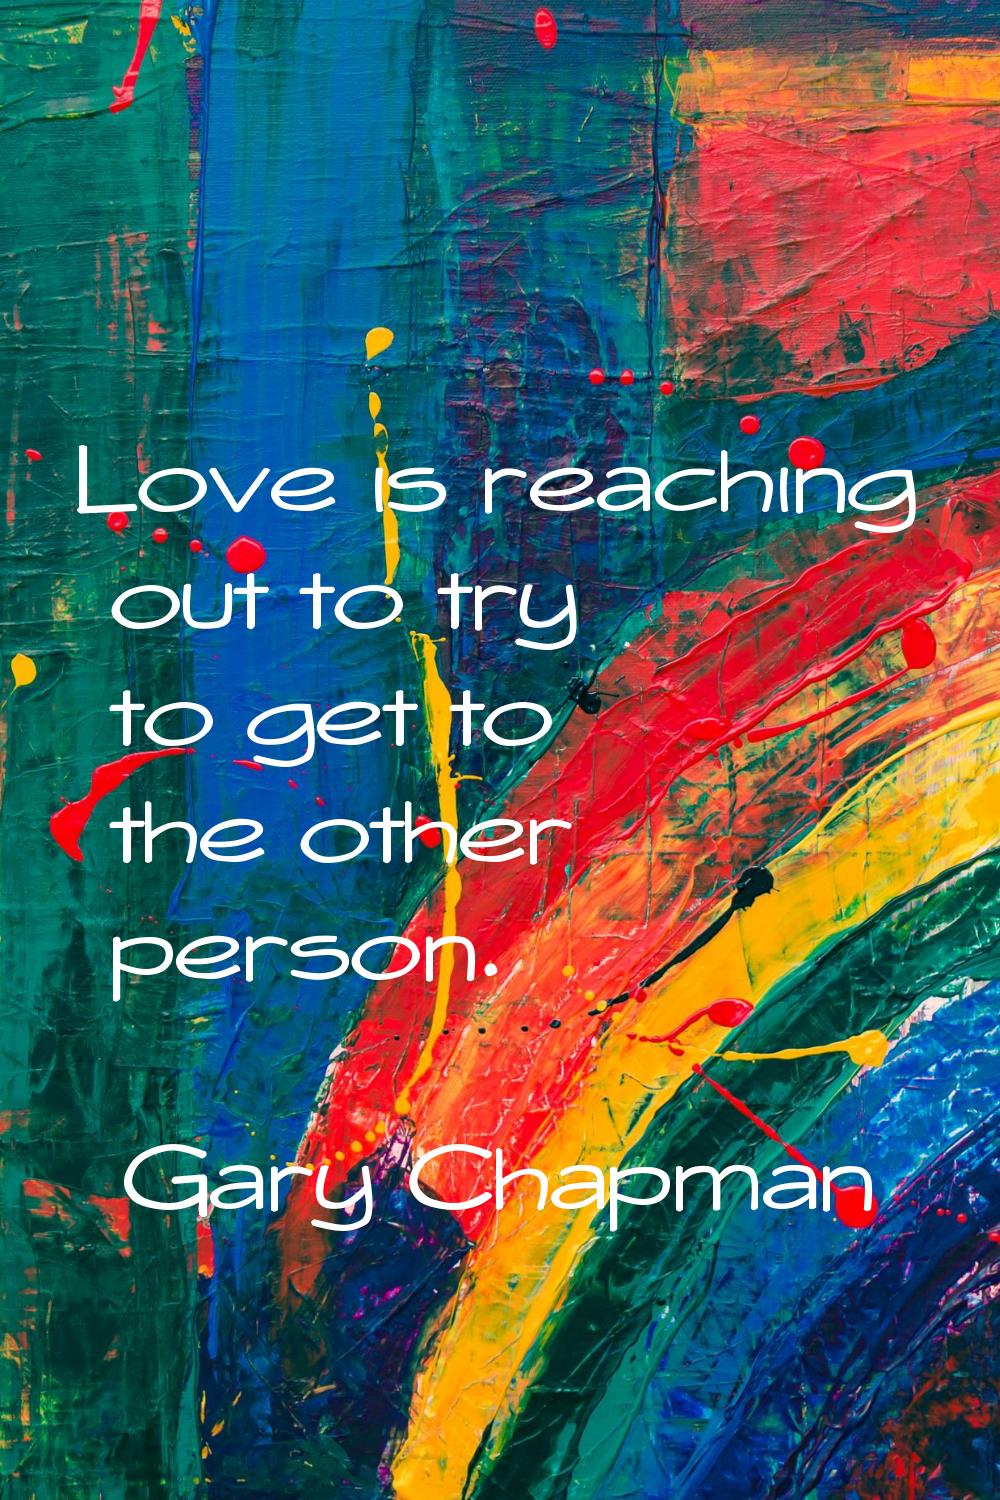 Love is reaching out to try to get to the other person.